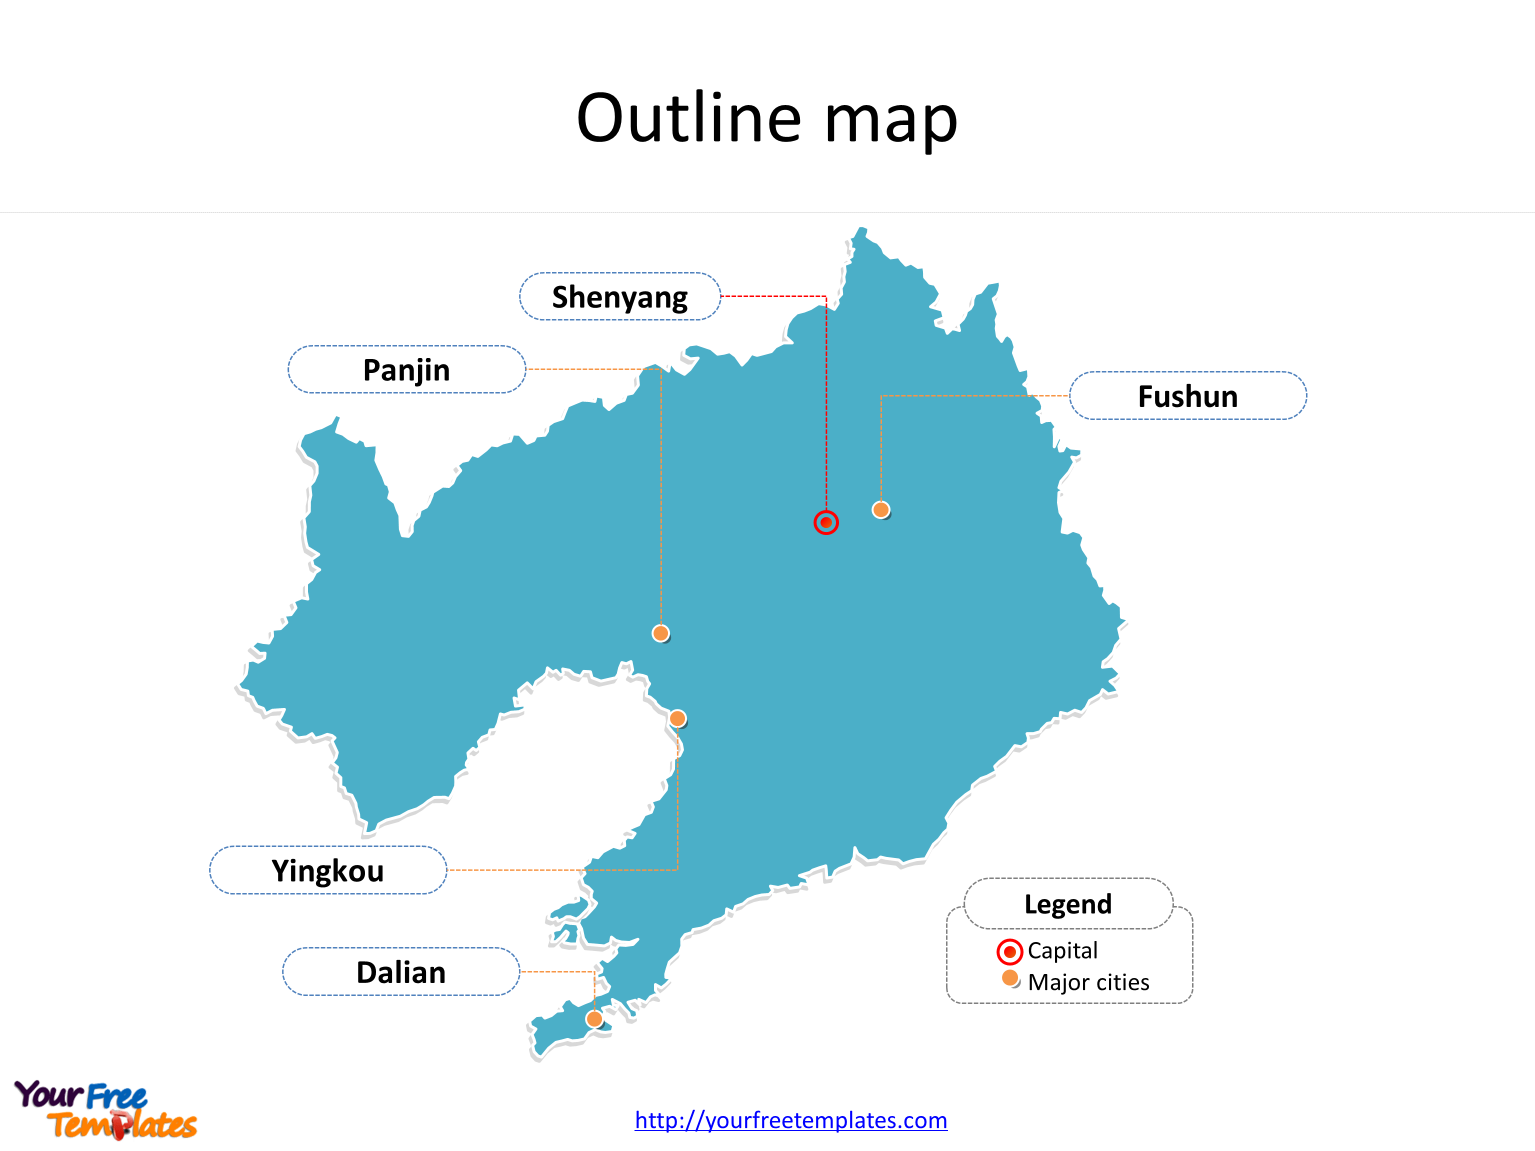 Province of Liaoning map with outline and cities labeled on the Liaoning maps PowerPoint templates